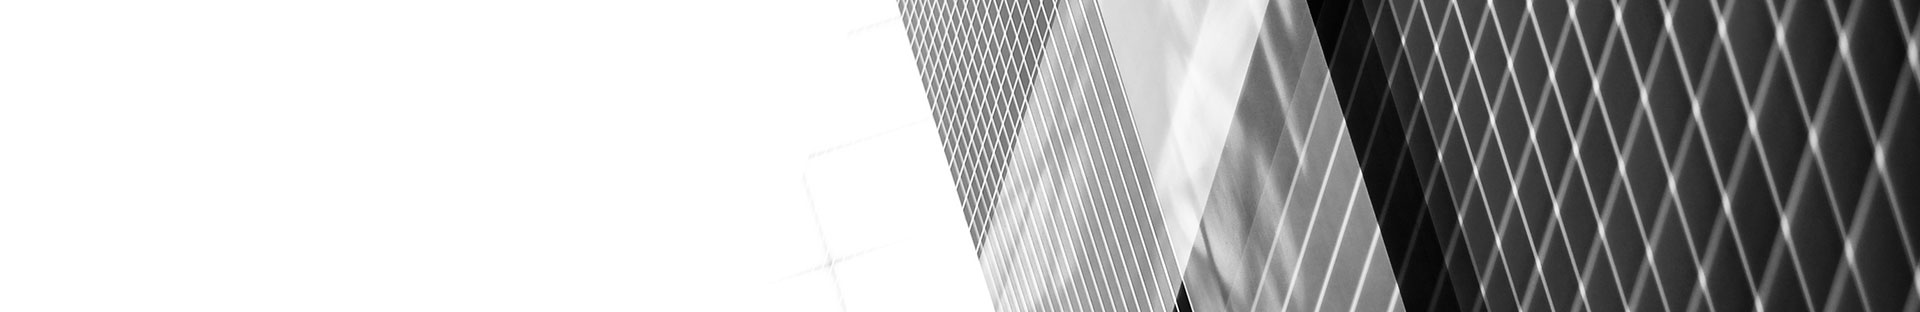 black and white close up of a glass building